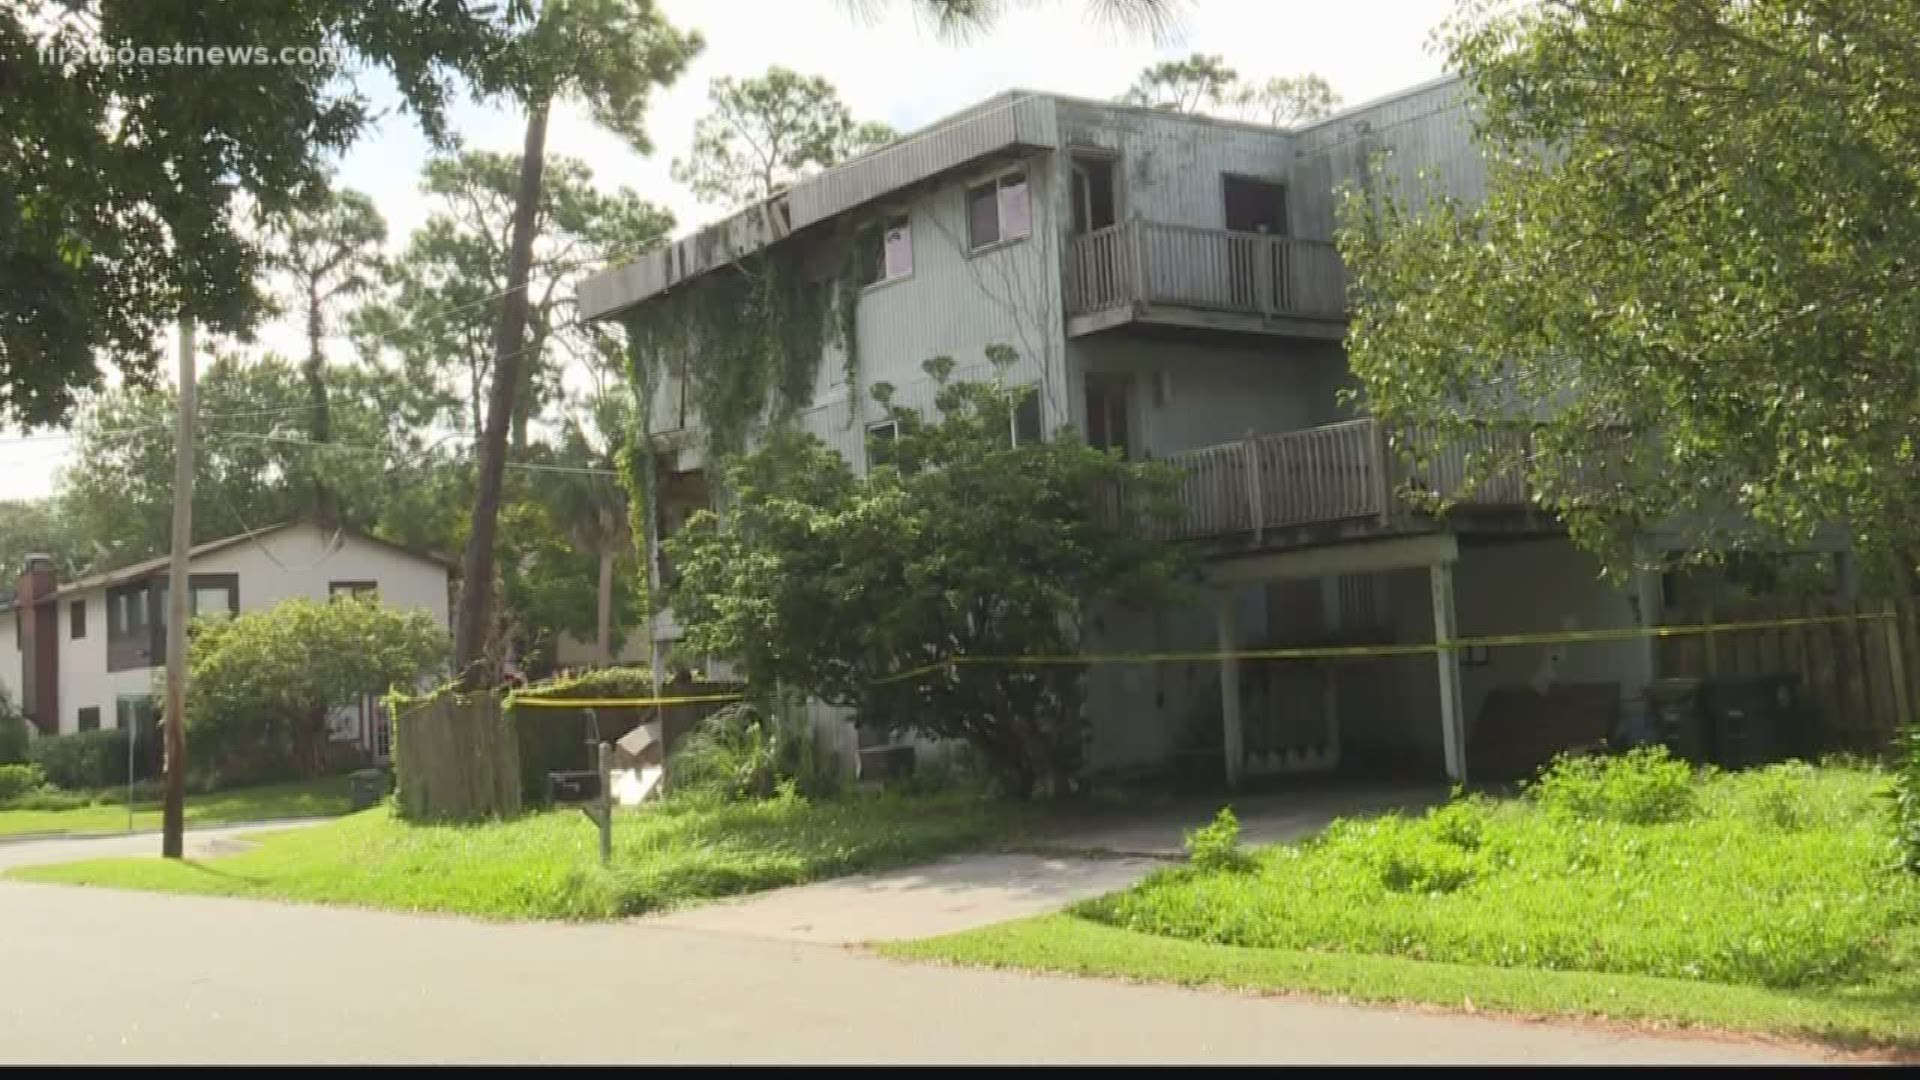 Homeowners in Atlantic Beach are tired of staring at a house in their neighborhood. The property was condemned in April of last year and order to be demolished in April of this year. So why is it still standing?